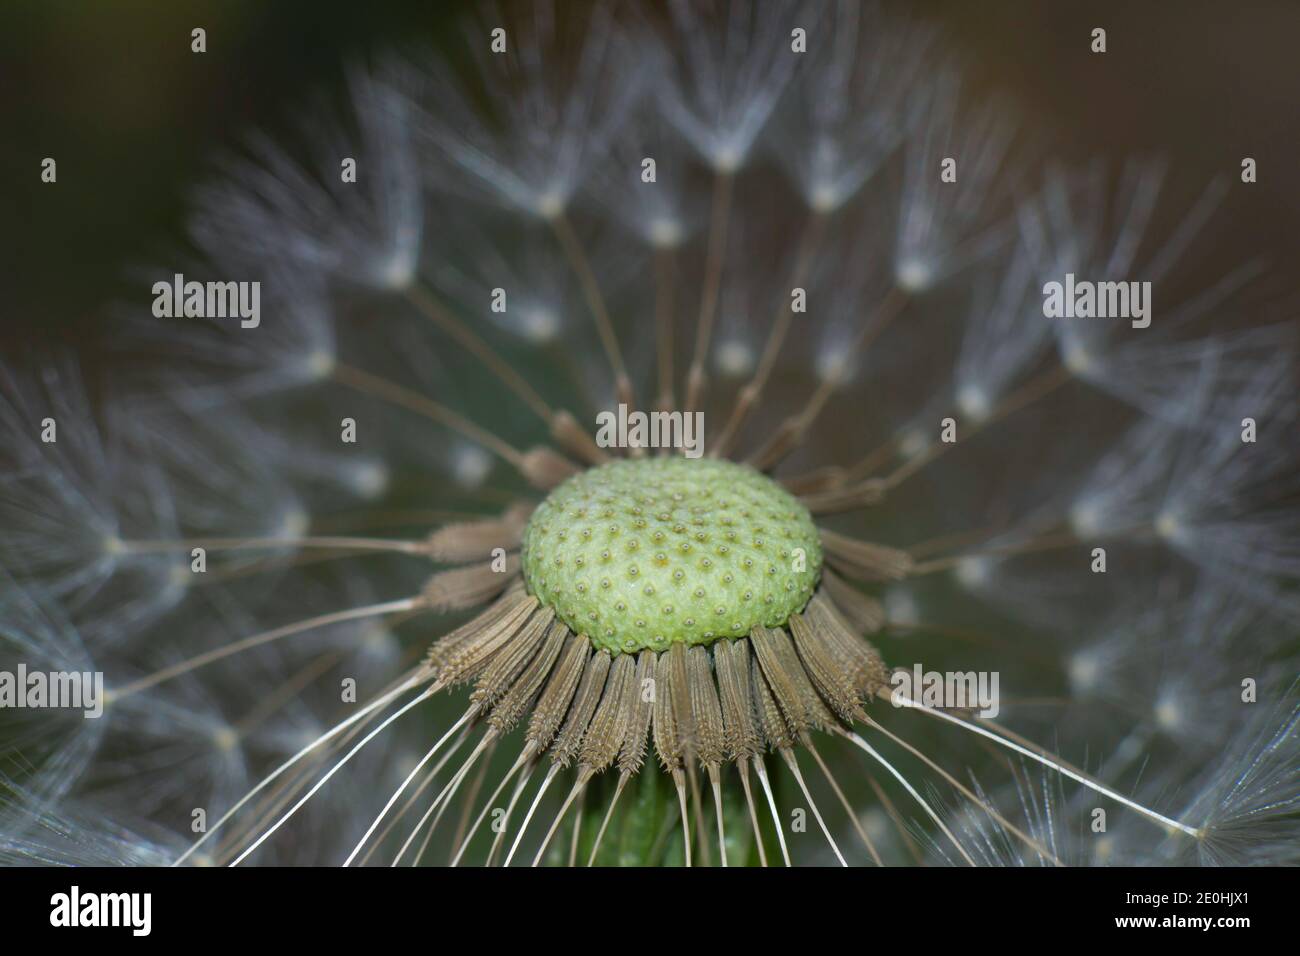 close-up of a withered dandelion fluffy head in blurred background meadow. Stock Photo